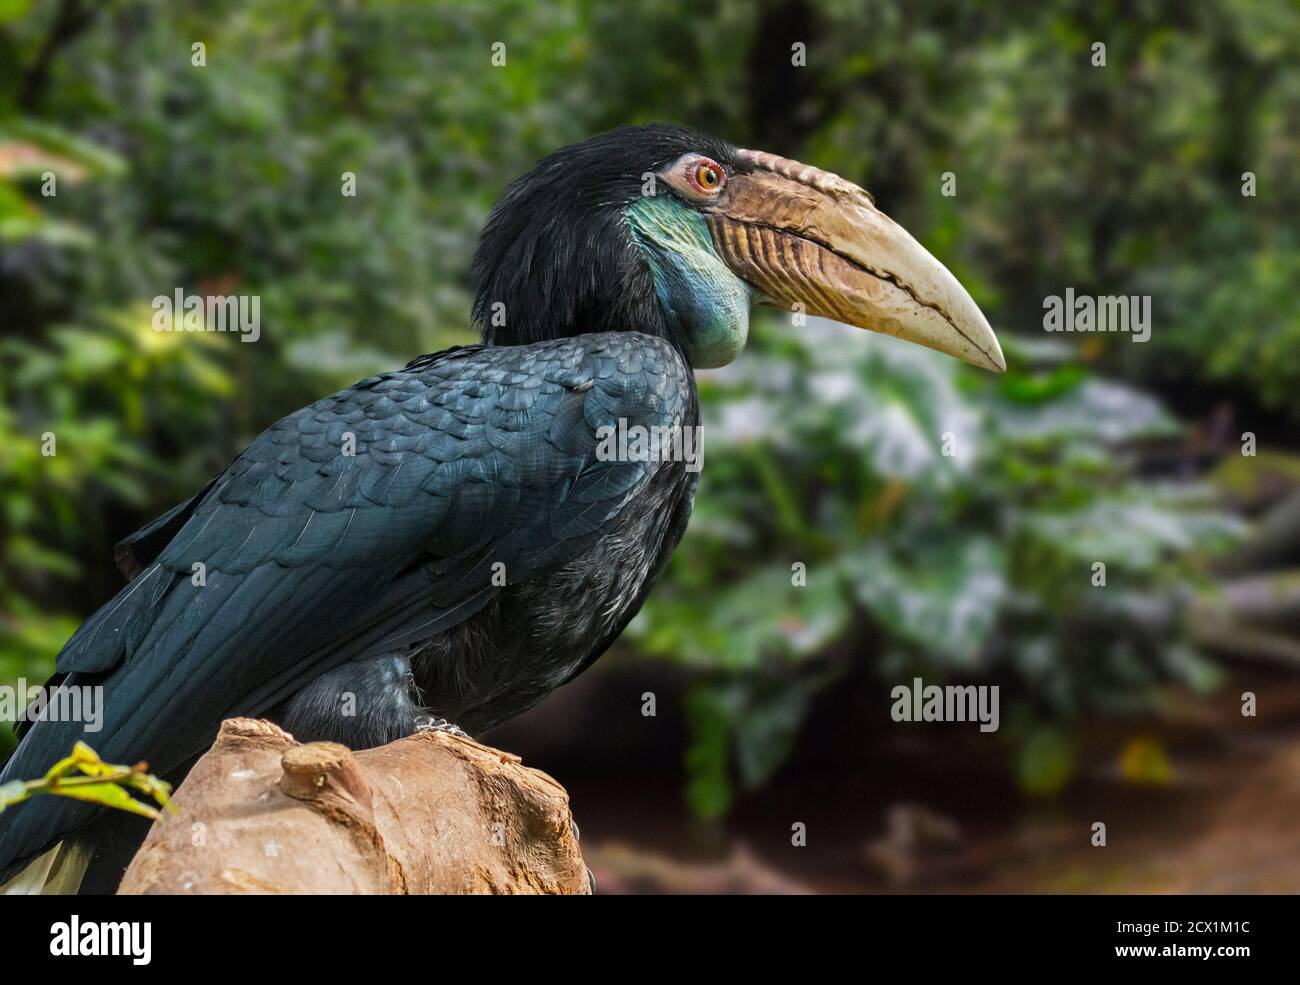 Wreathed hornbill / bar-pouched wreathed hornbill (Rhyticeros undulatus) female perched in tree, native to India, Bhutan and Indonesia Stock Photo